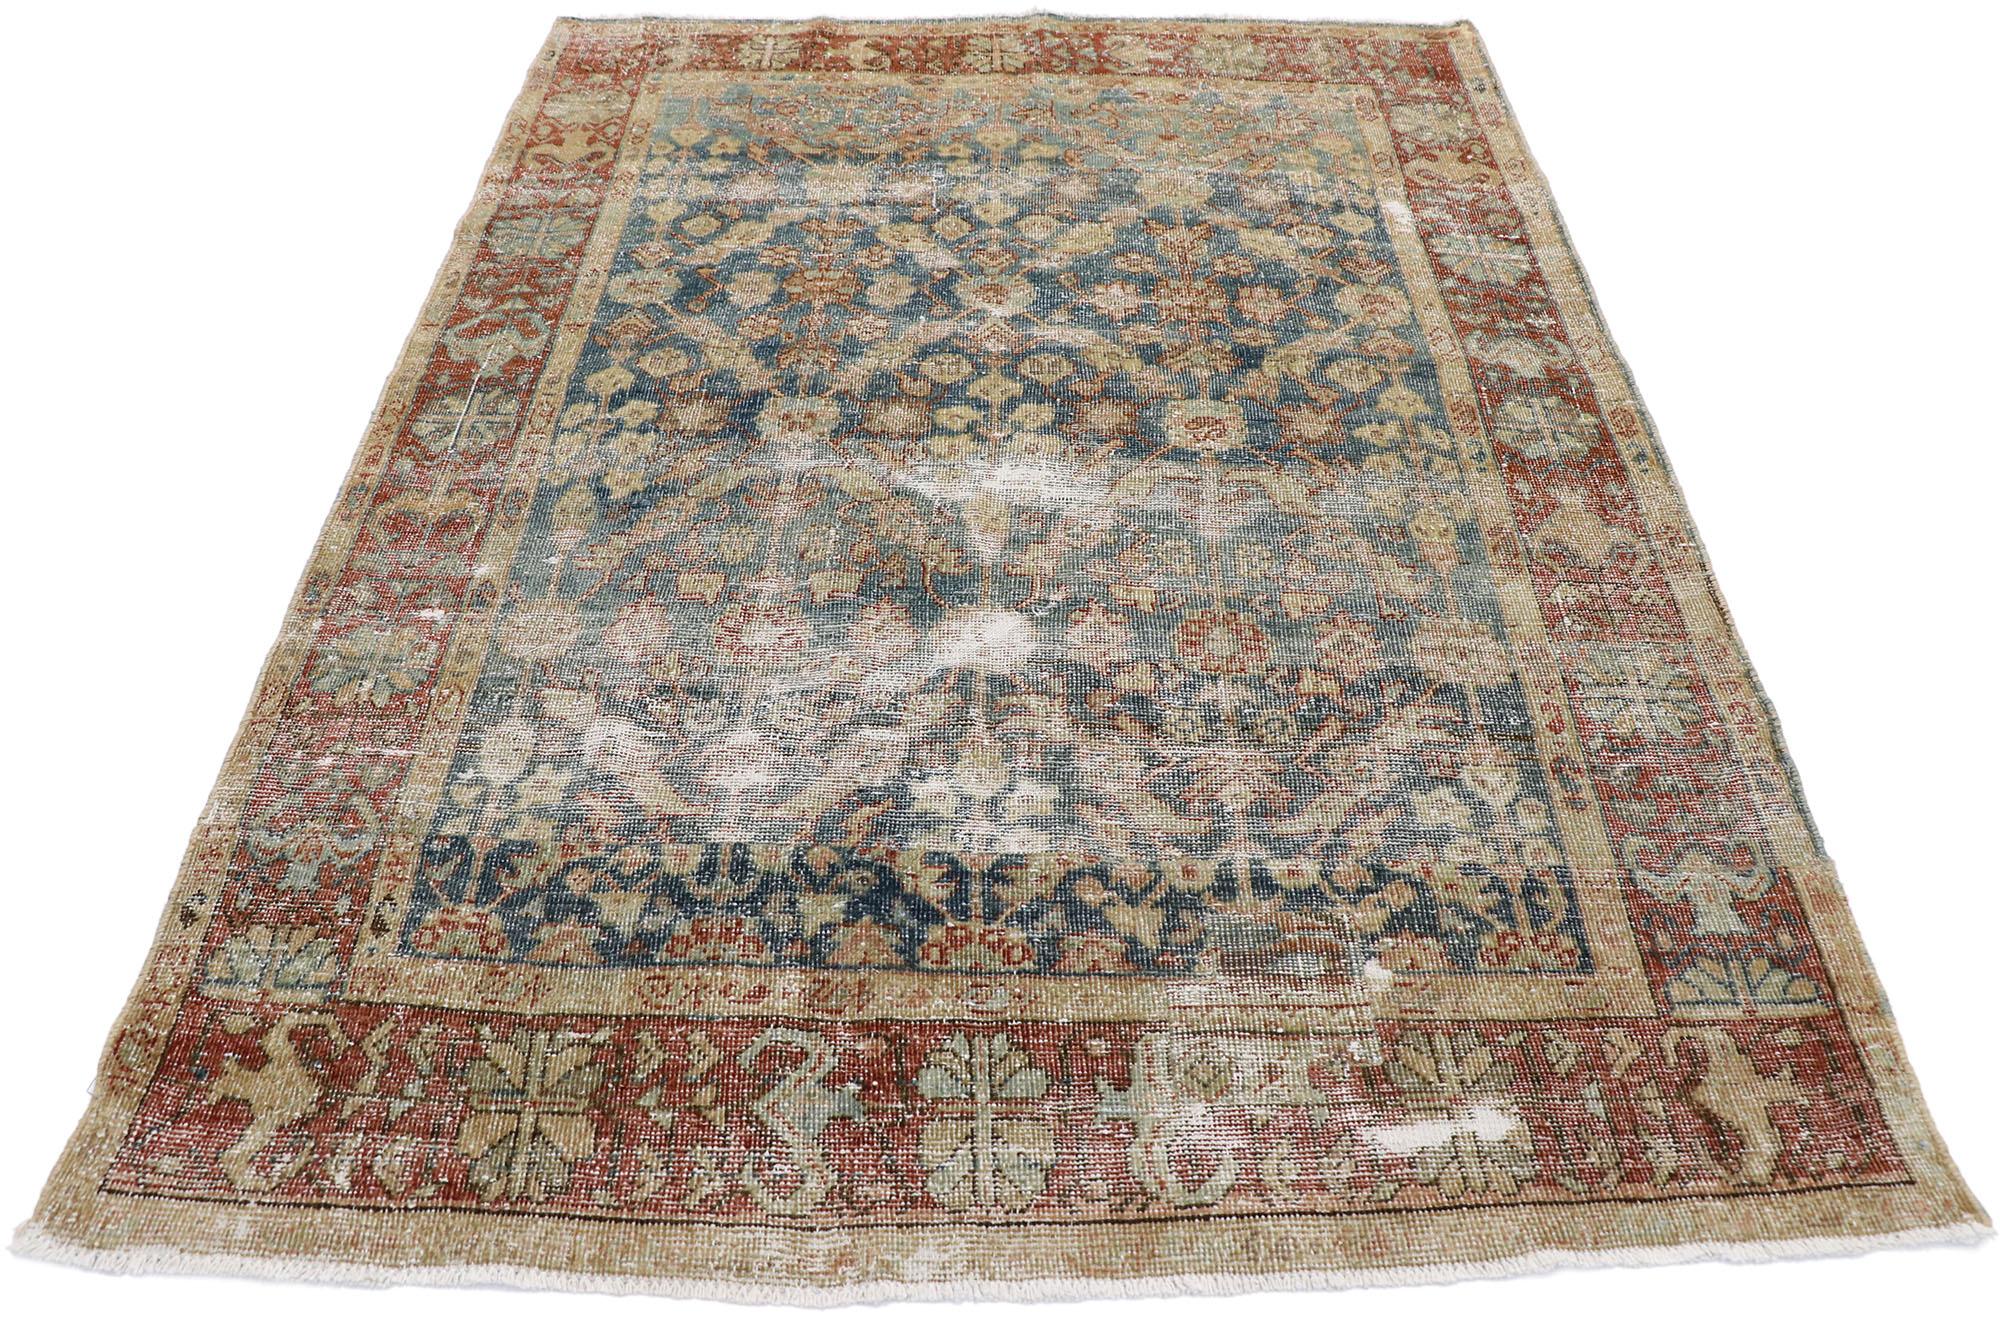 Tribal Distressed Antique Persian Mahal Rug with Rustic English Style For Sale